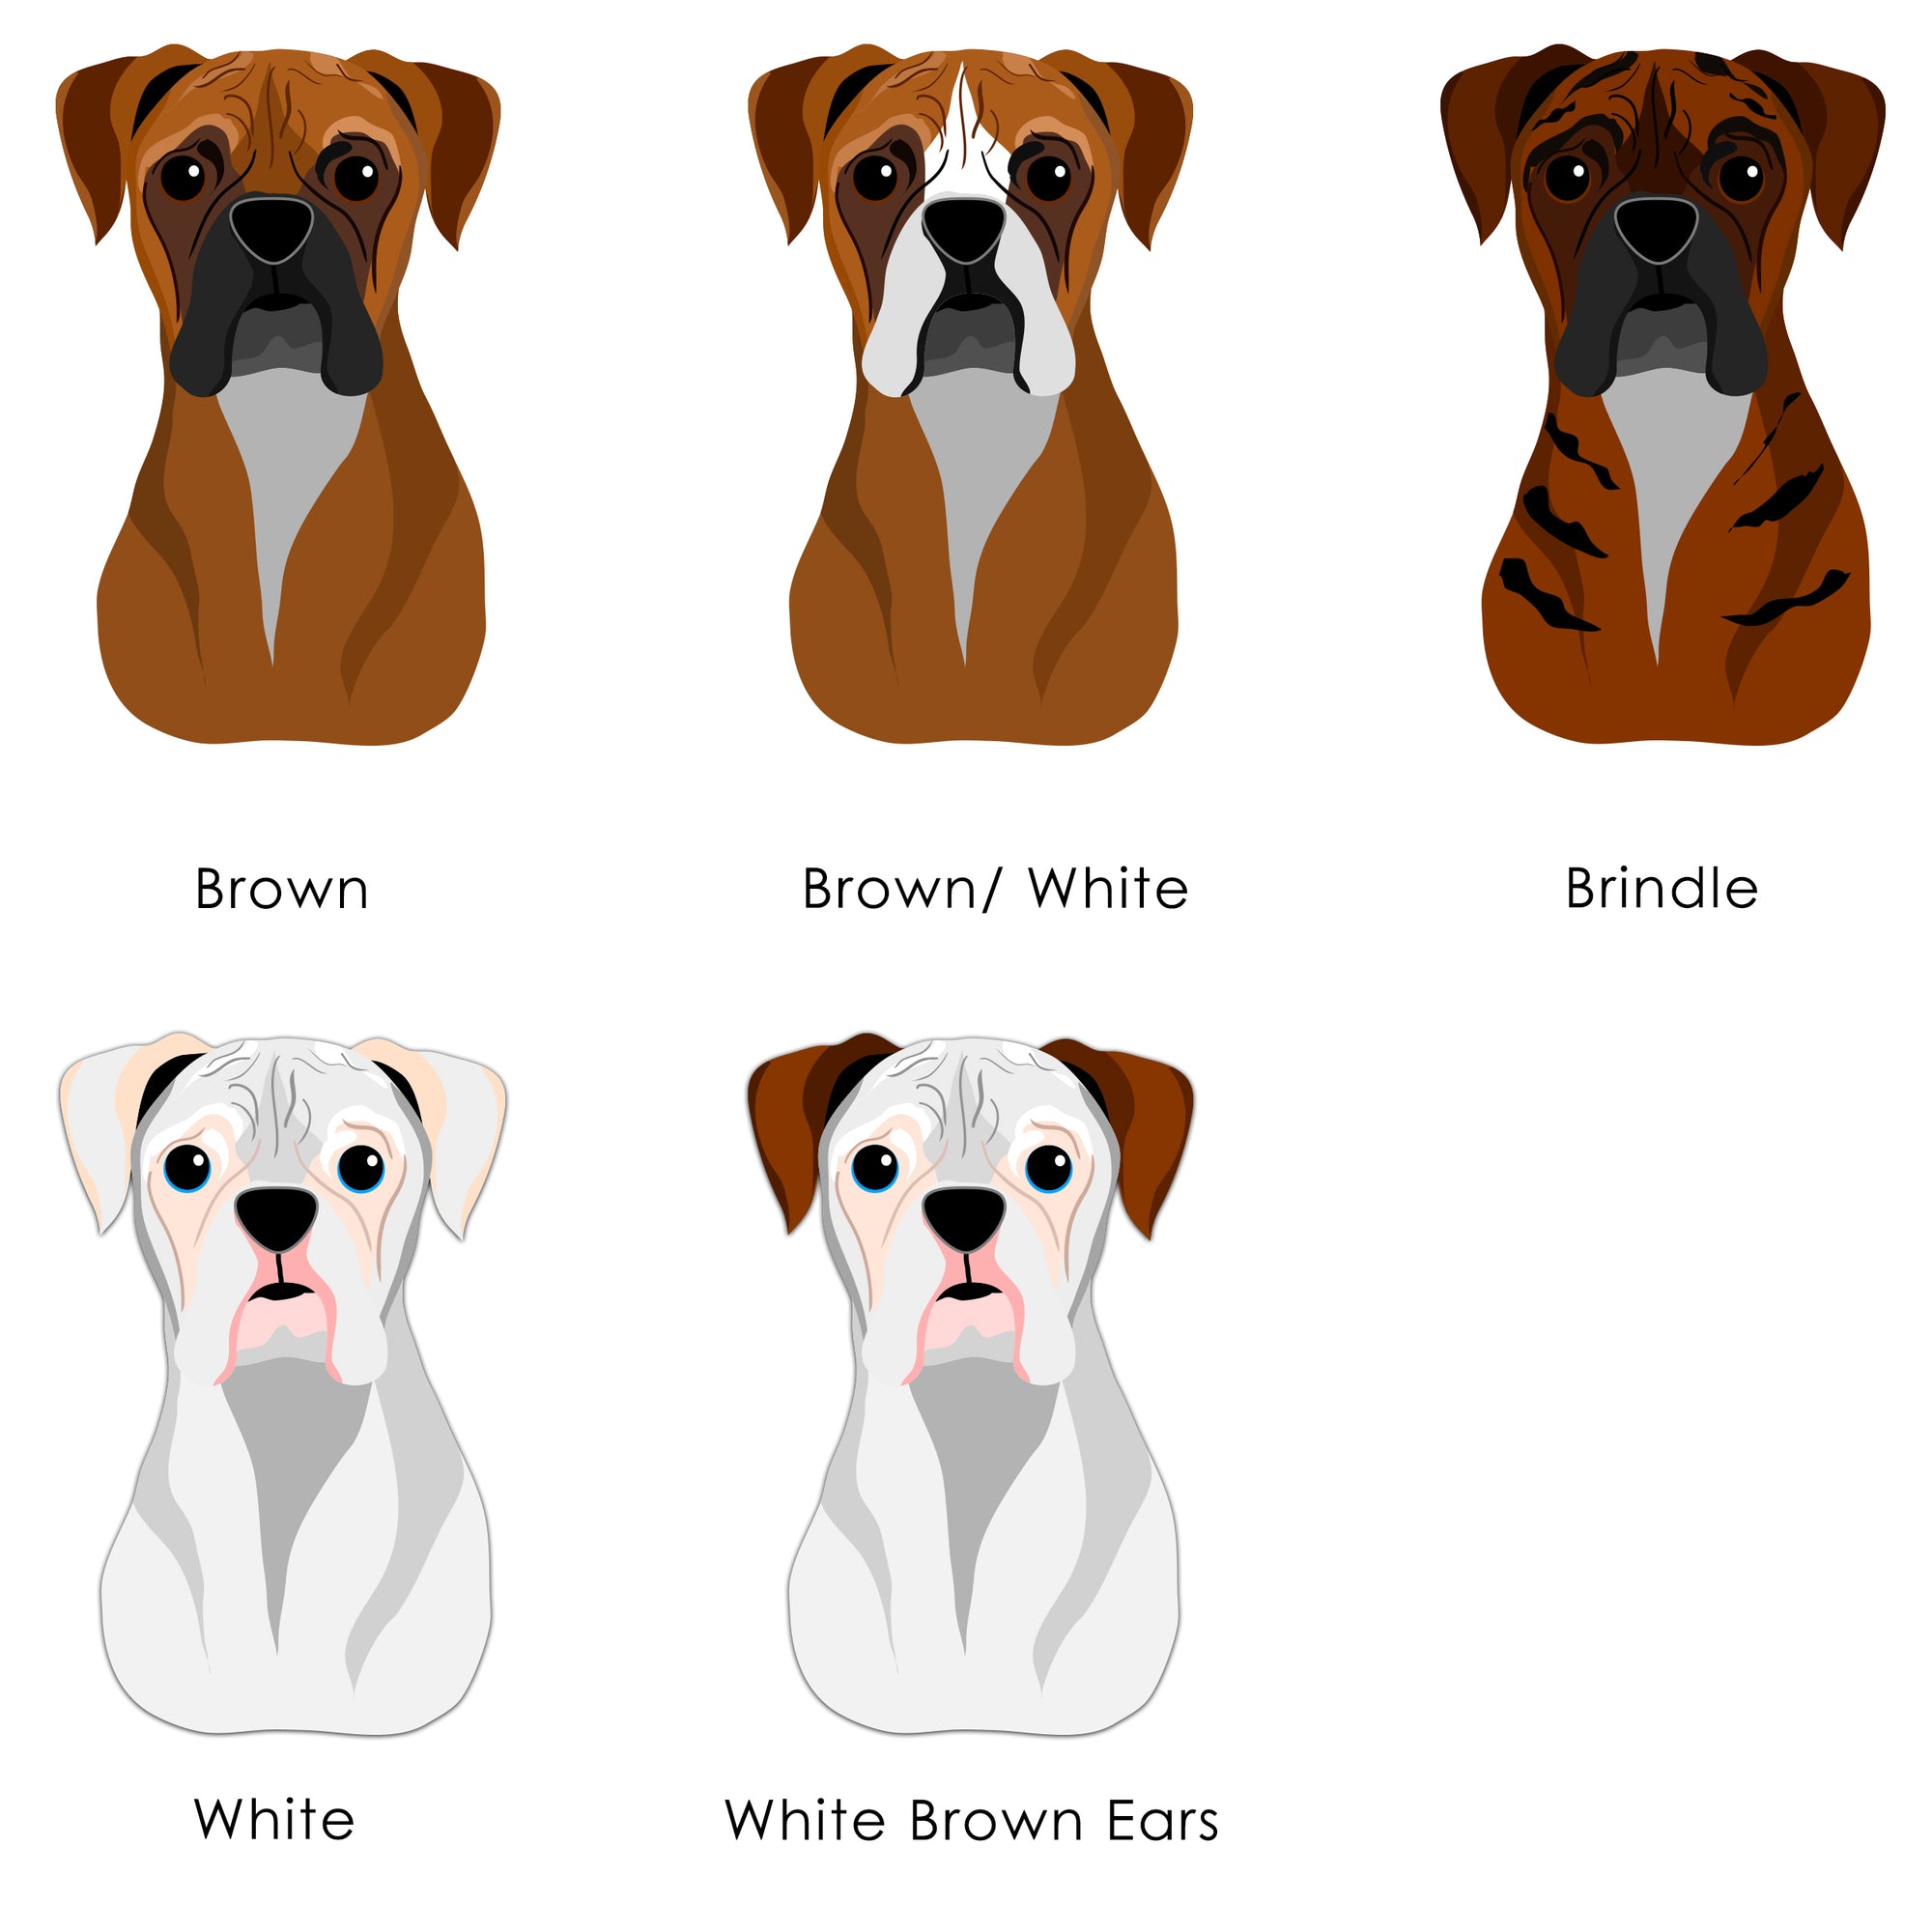 Boxer Realistic Personalised Dog ID Tag